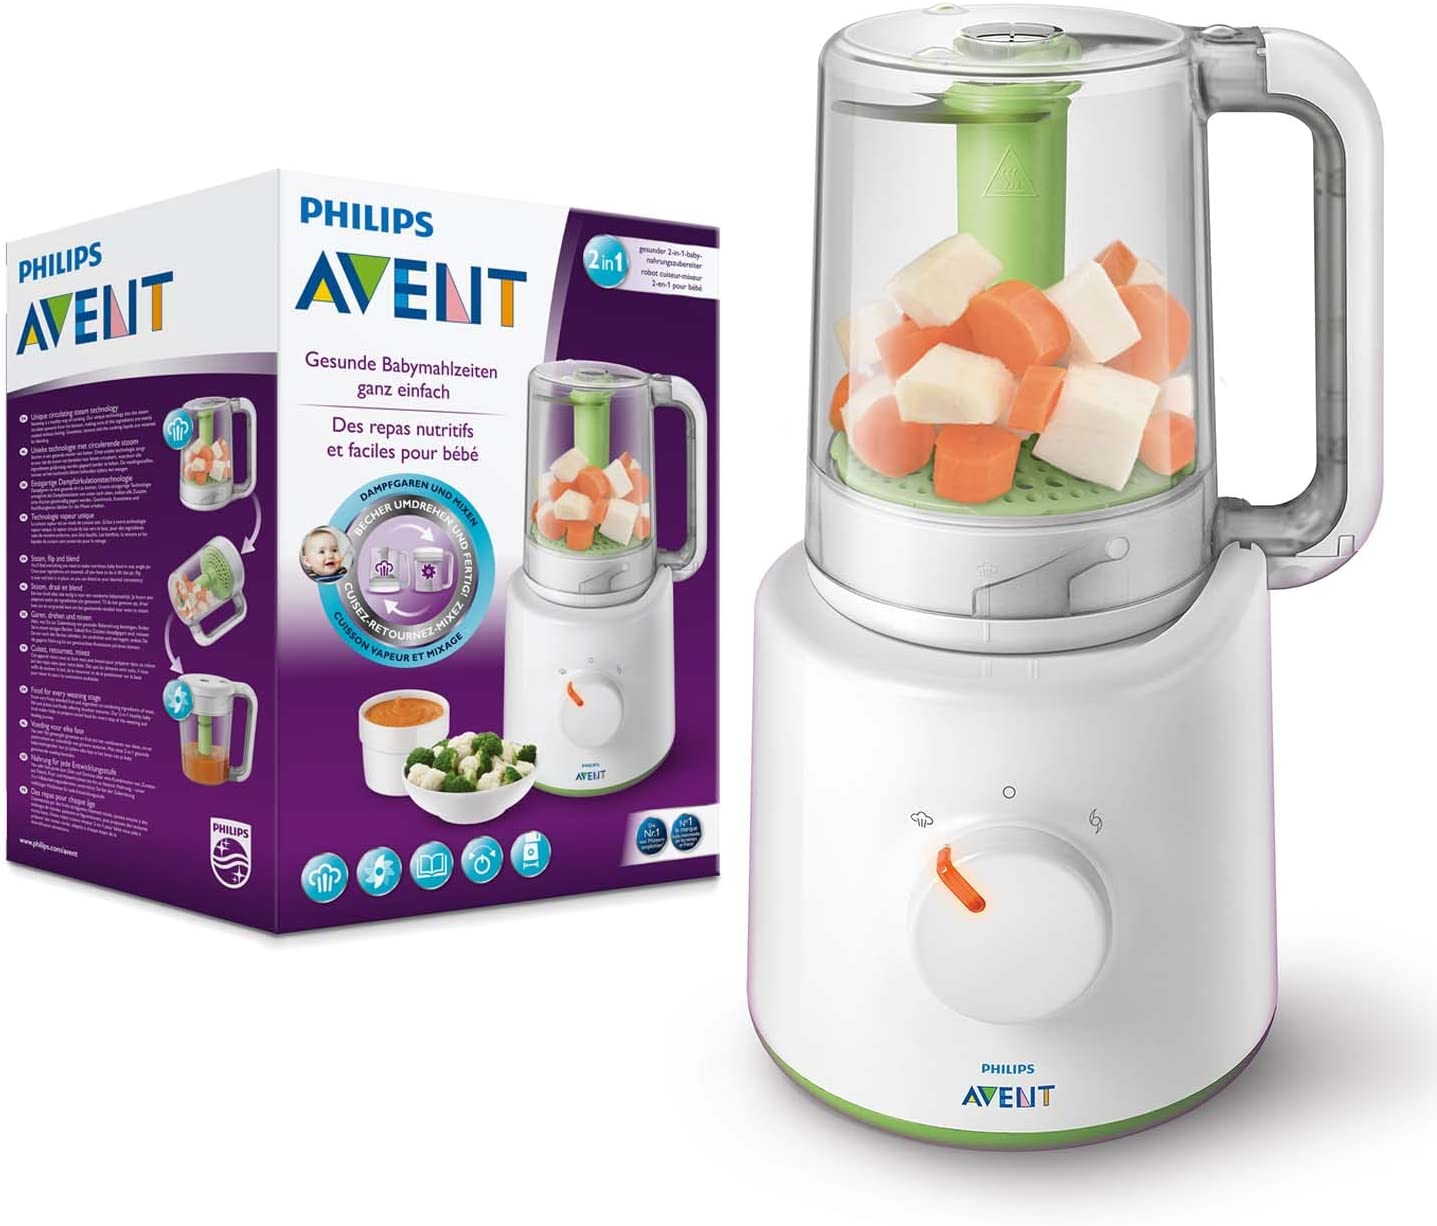 Philips Avent EasyPappa - 2 in 1 Multifunzione